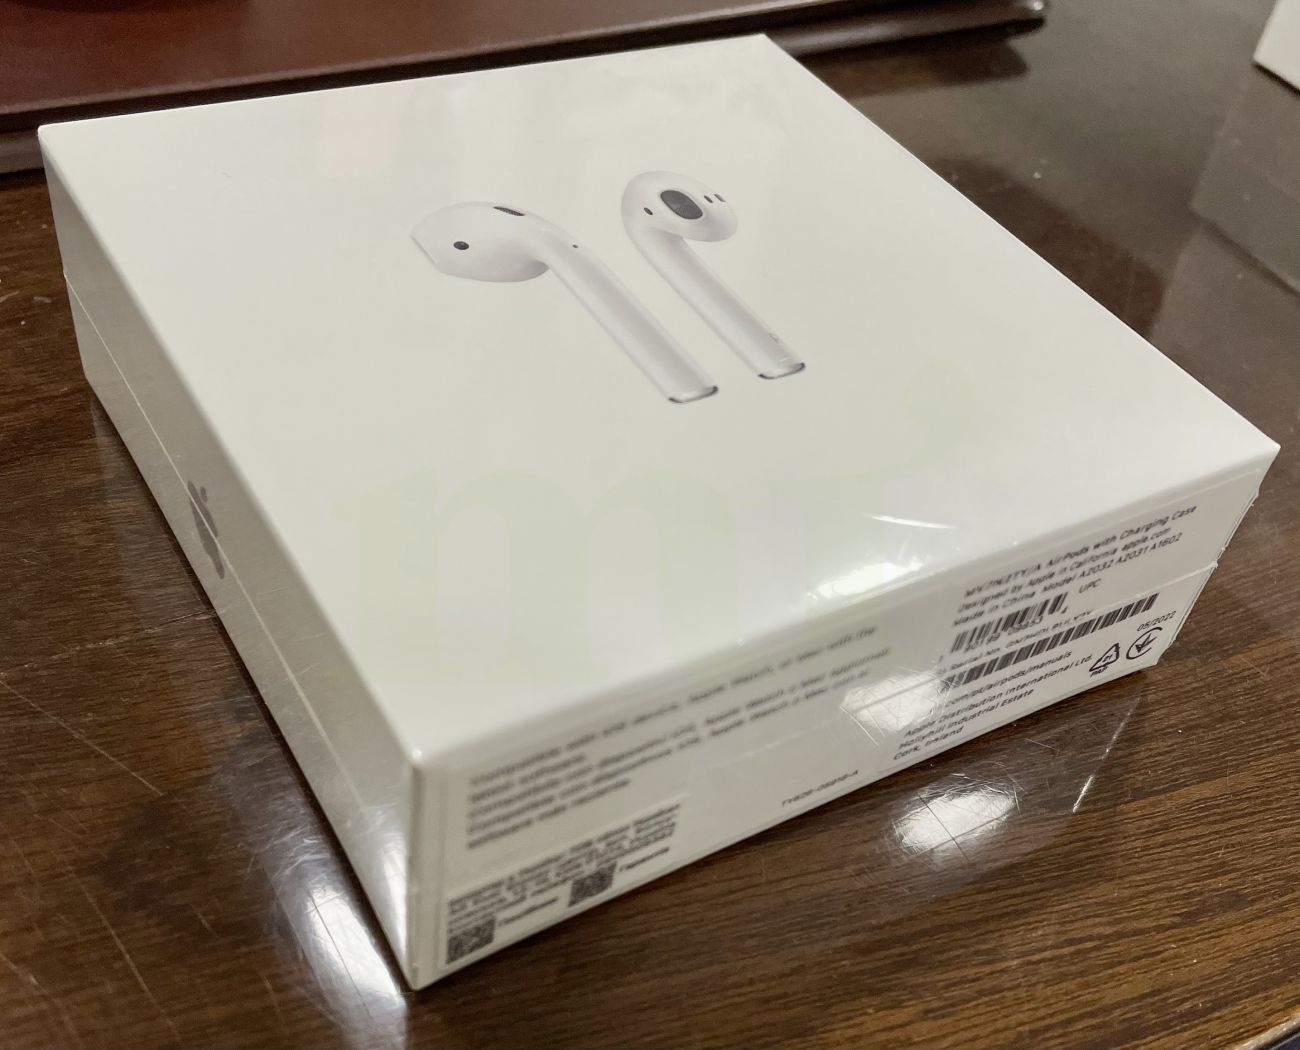 Auriculares Apple AirPods 2